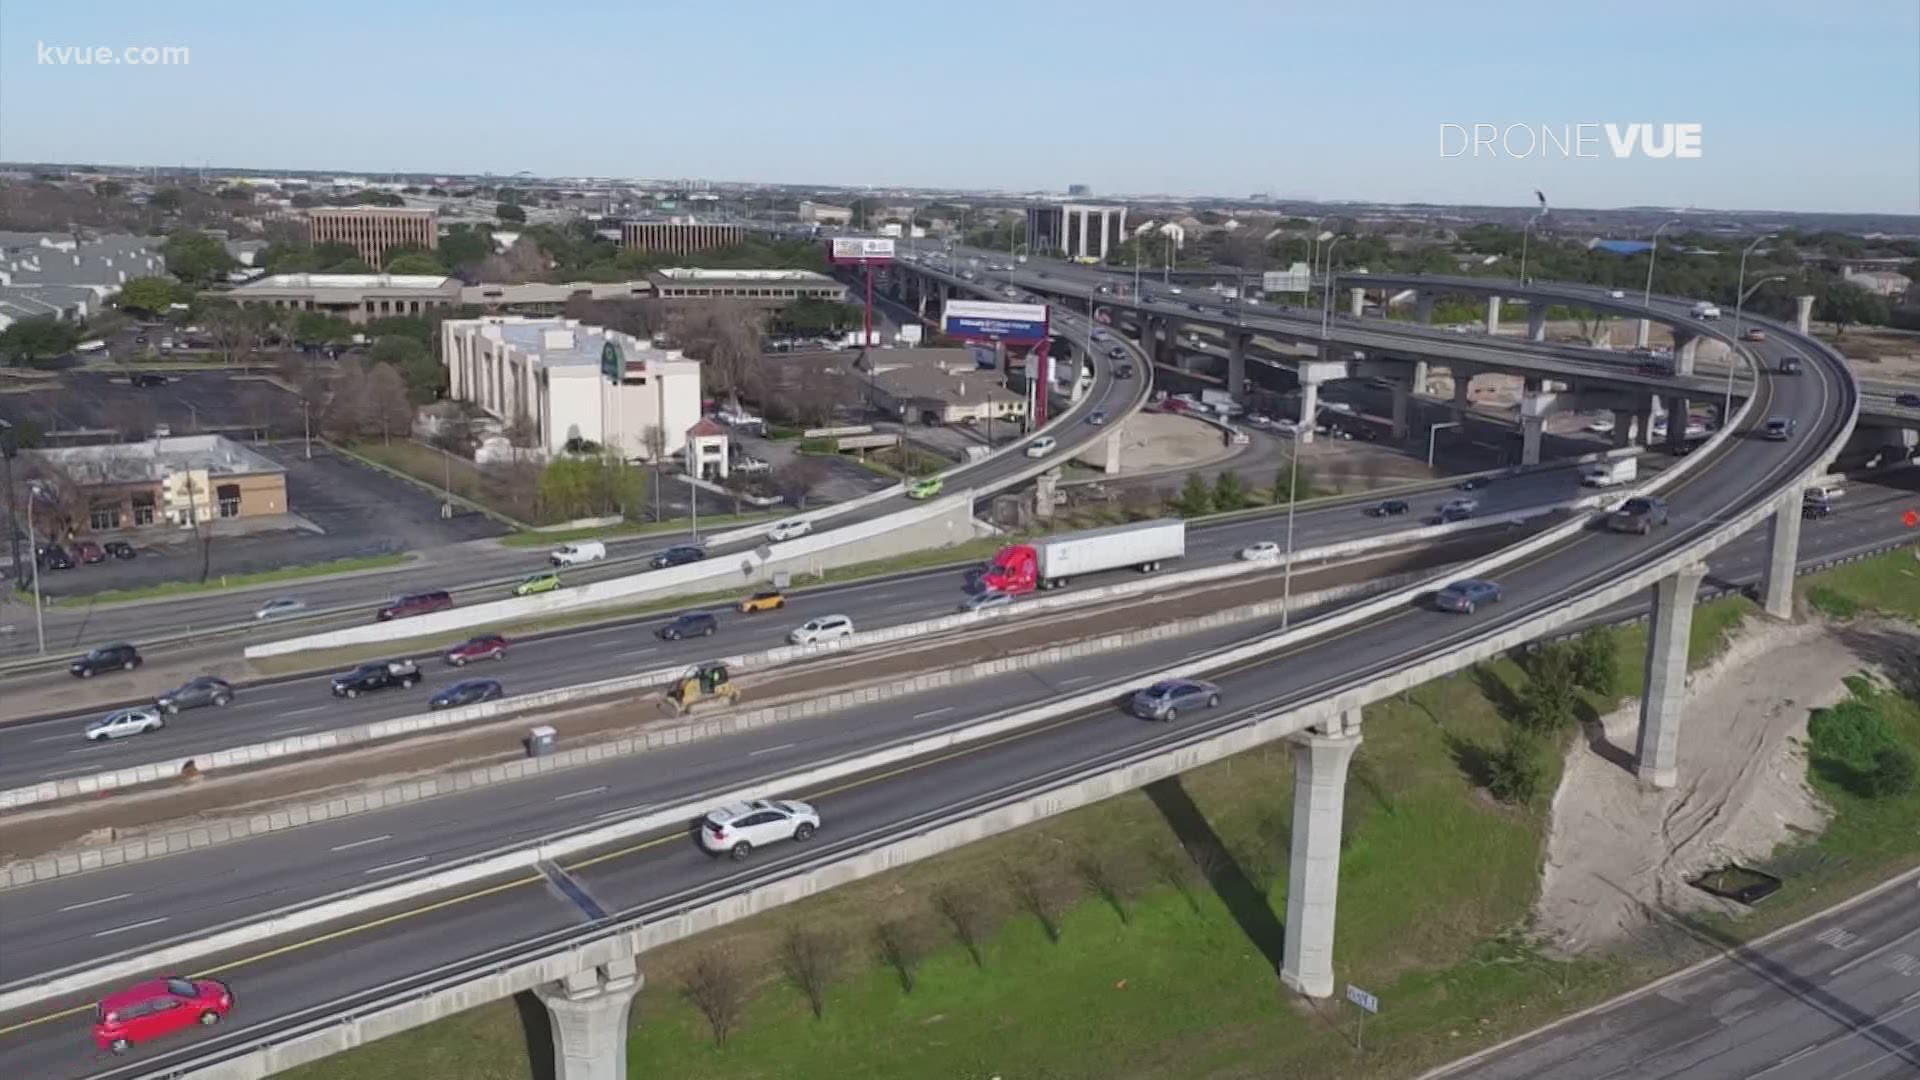 Drivers in North Austin should prepare for more headaches. Starting Sunday night, TxDOT will close the flyover between northbound I-35 and northbound U.S. 183.